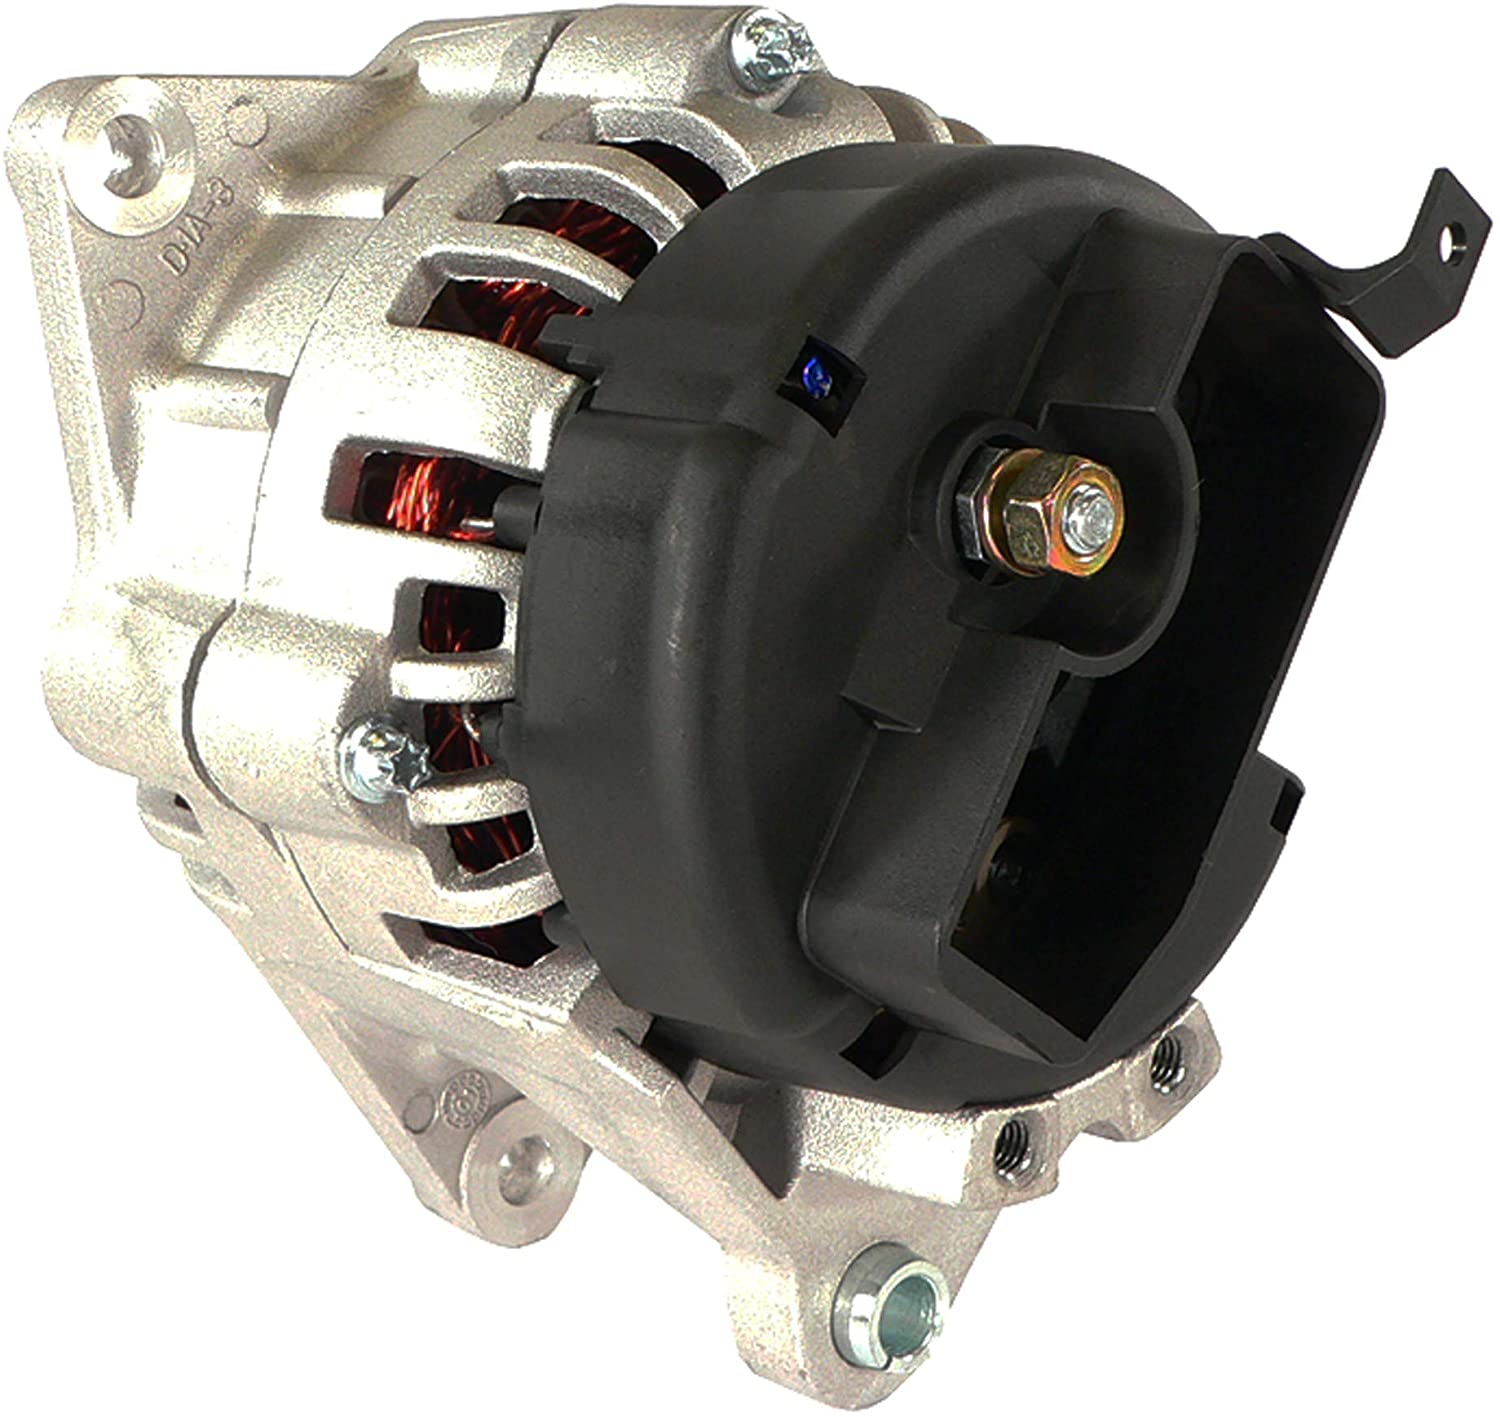 DB Electrical Adr0053 Alternator Compatible With/Replacement For Chevrolet Oldsmobile Pontiac 3.4L 1994 1995 1996 1997, 3.4L Lumina Cutlass Grand Prix 1994 1995 1996, Monte Carlo1995 1997